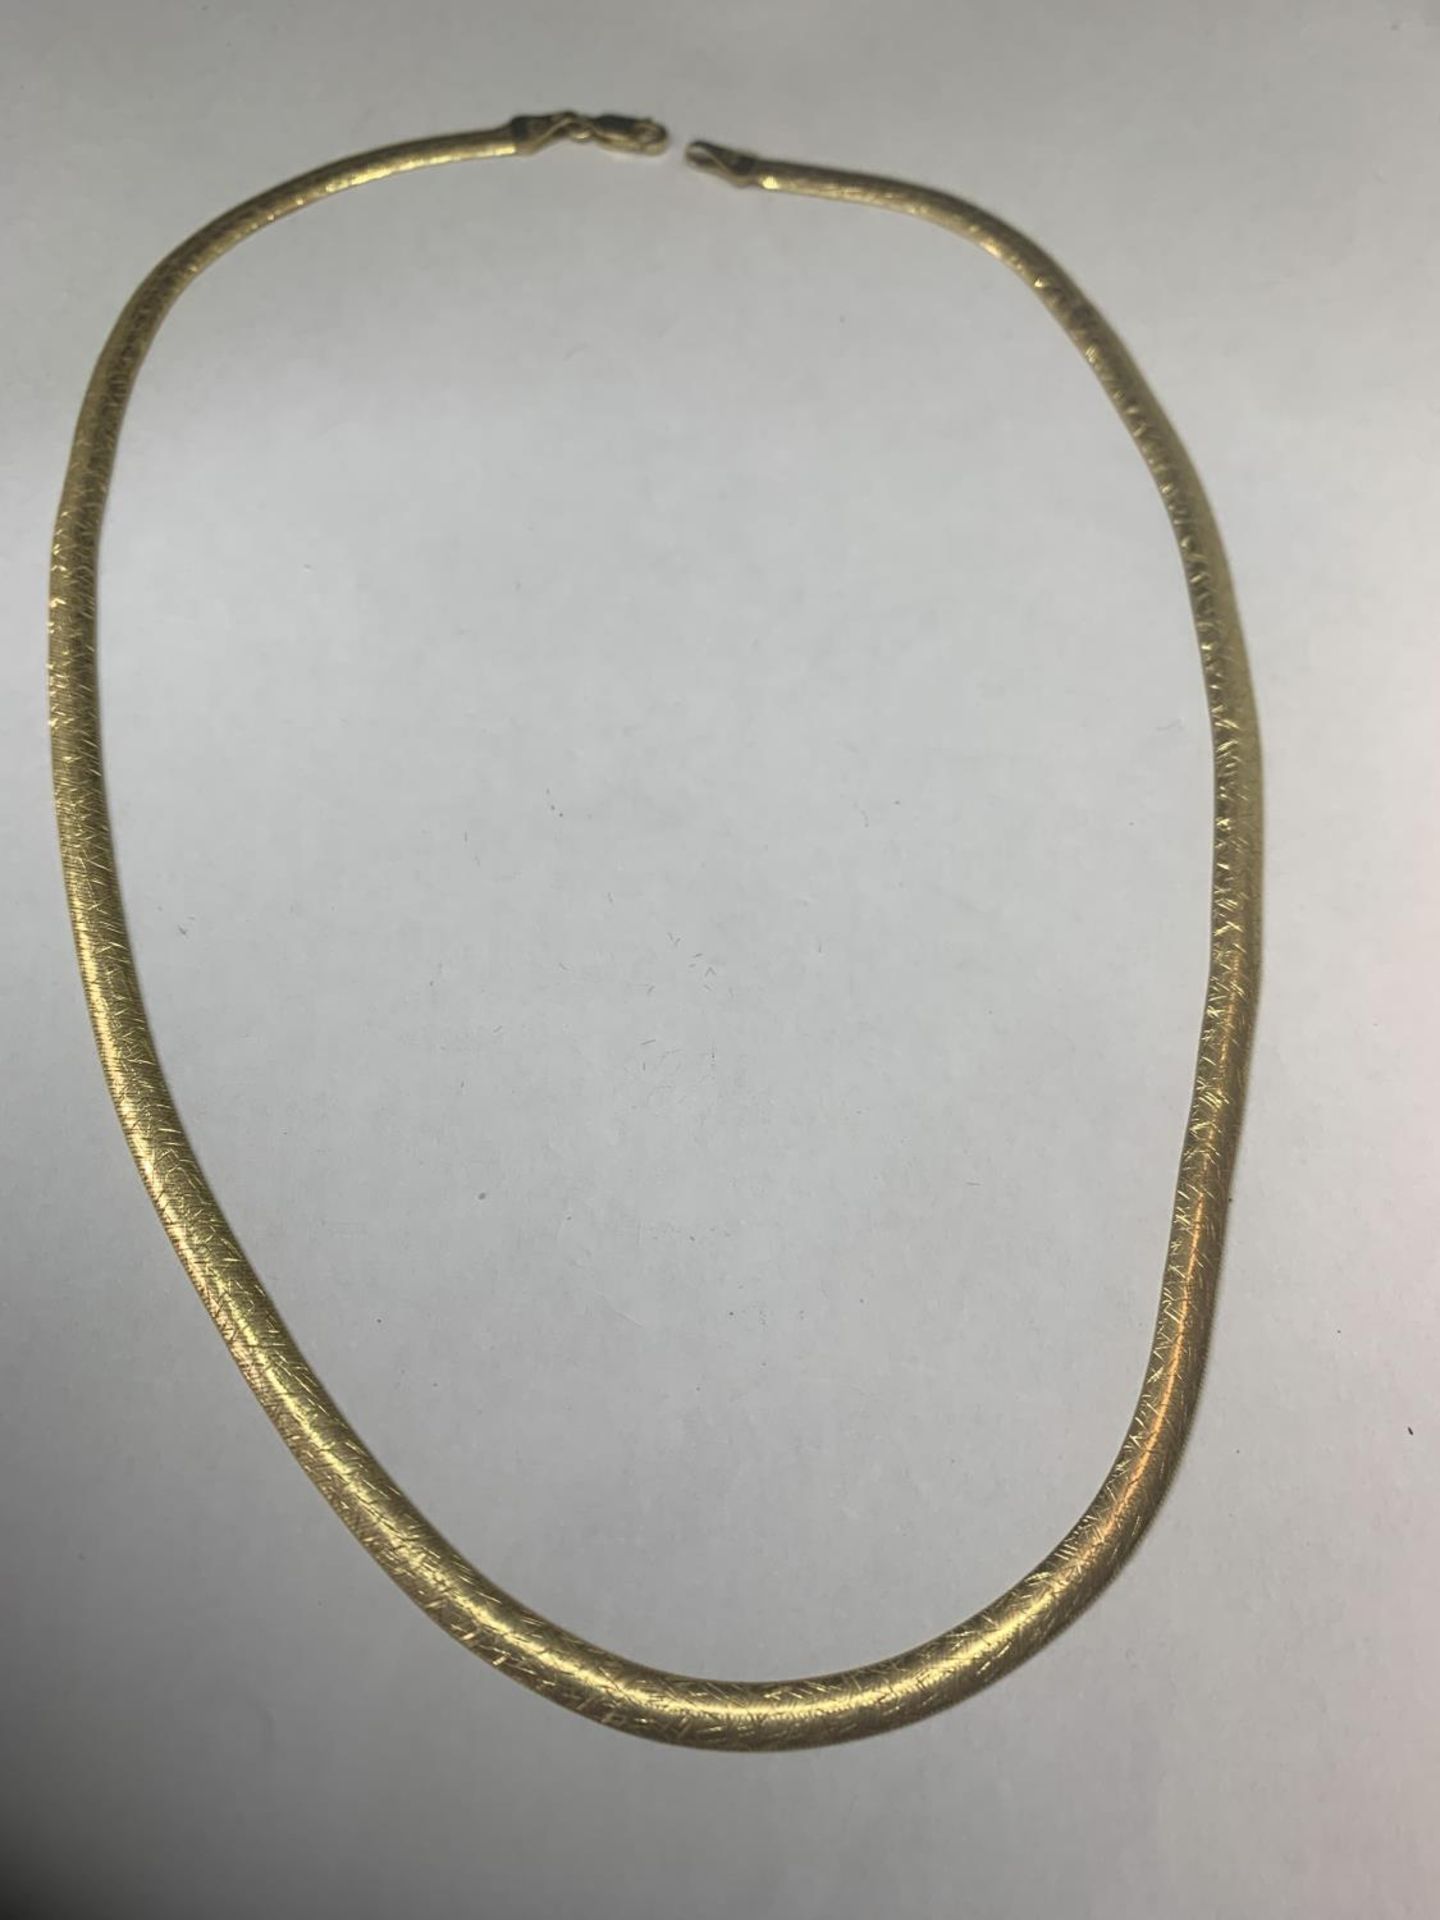 A 9 CARAT GOLD NECKLACE MARKED 375 LENGTH 46CM GROSS WEIGHT 7.4 GRAMS